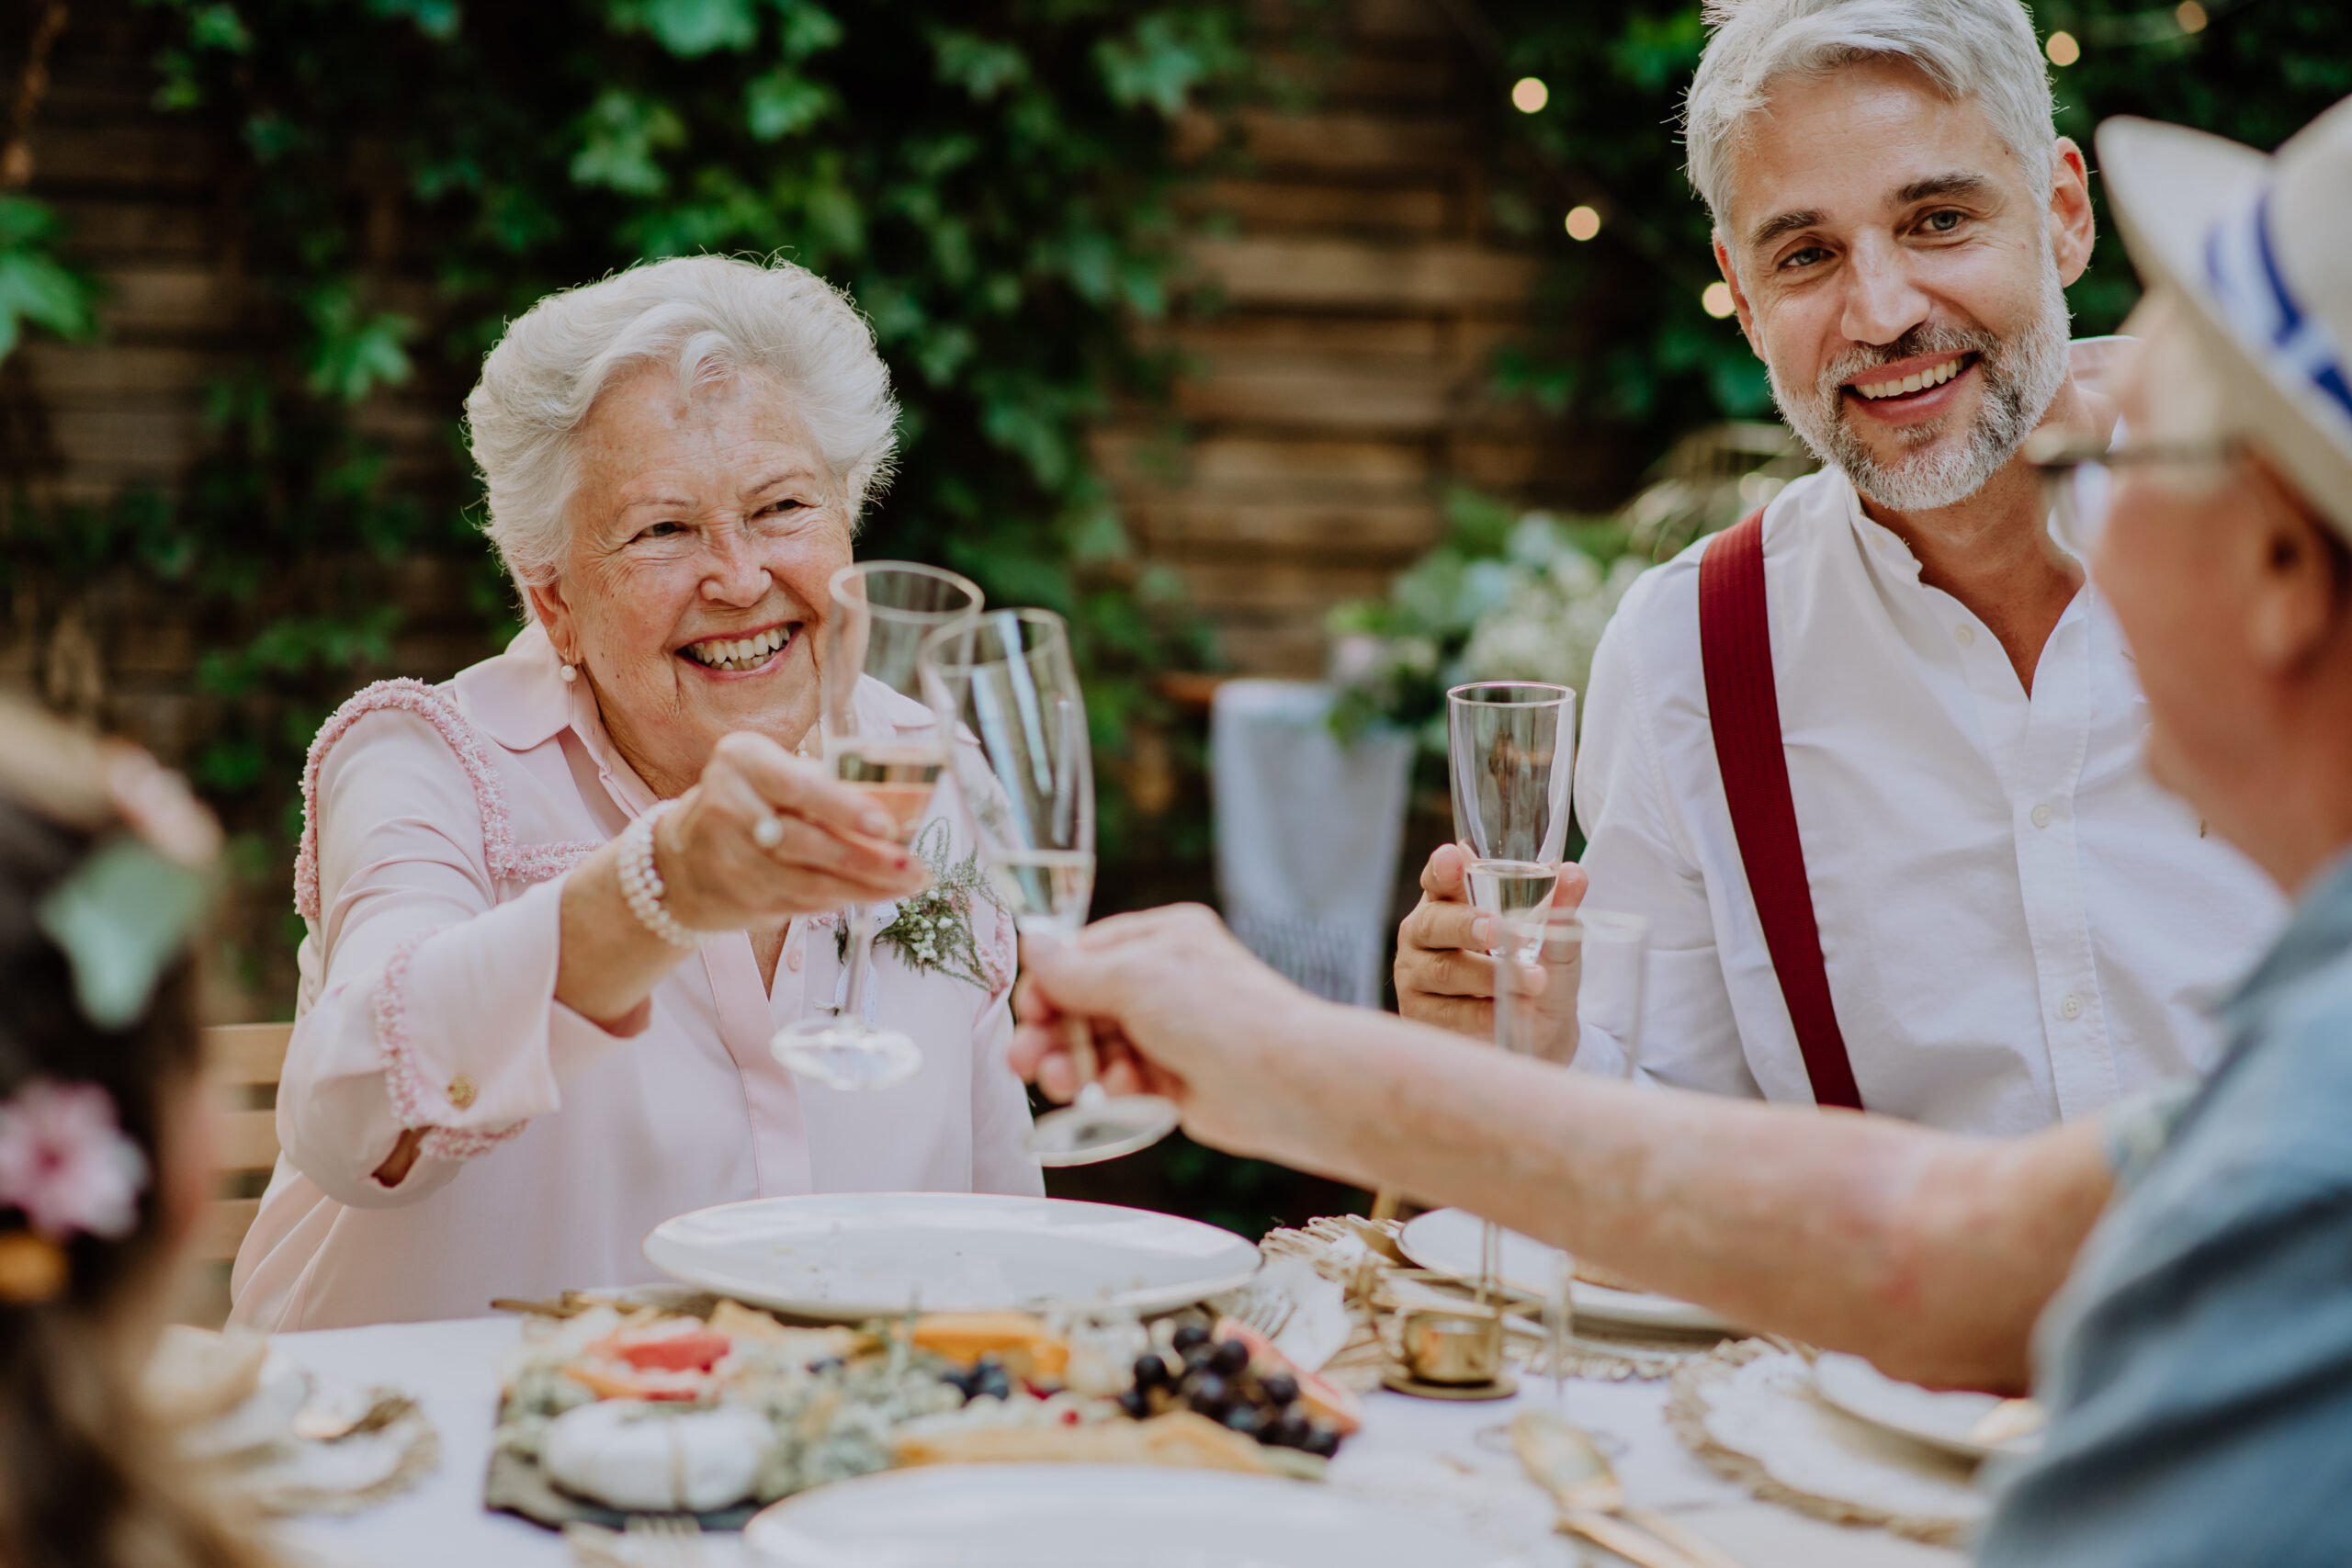 Mature groom toasting with his parents in law at wedding reception outside in backyard.